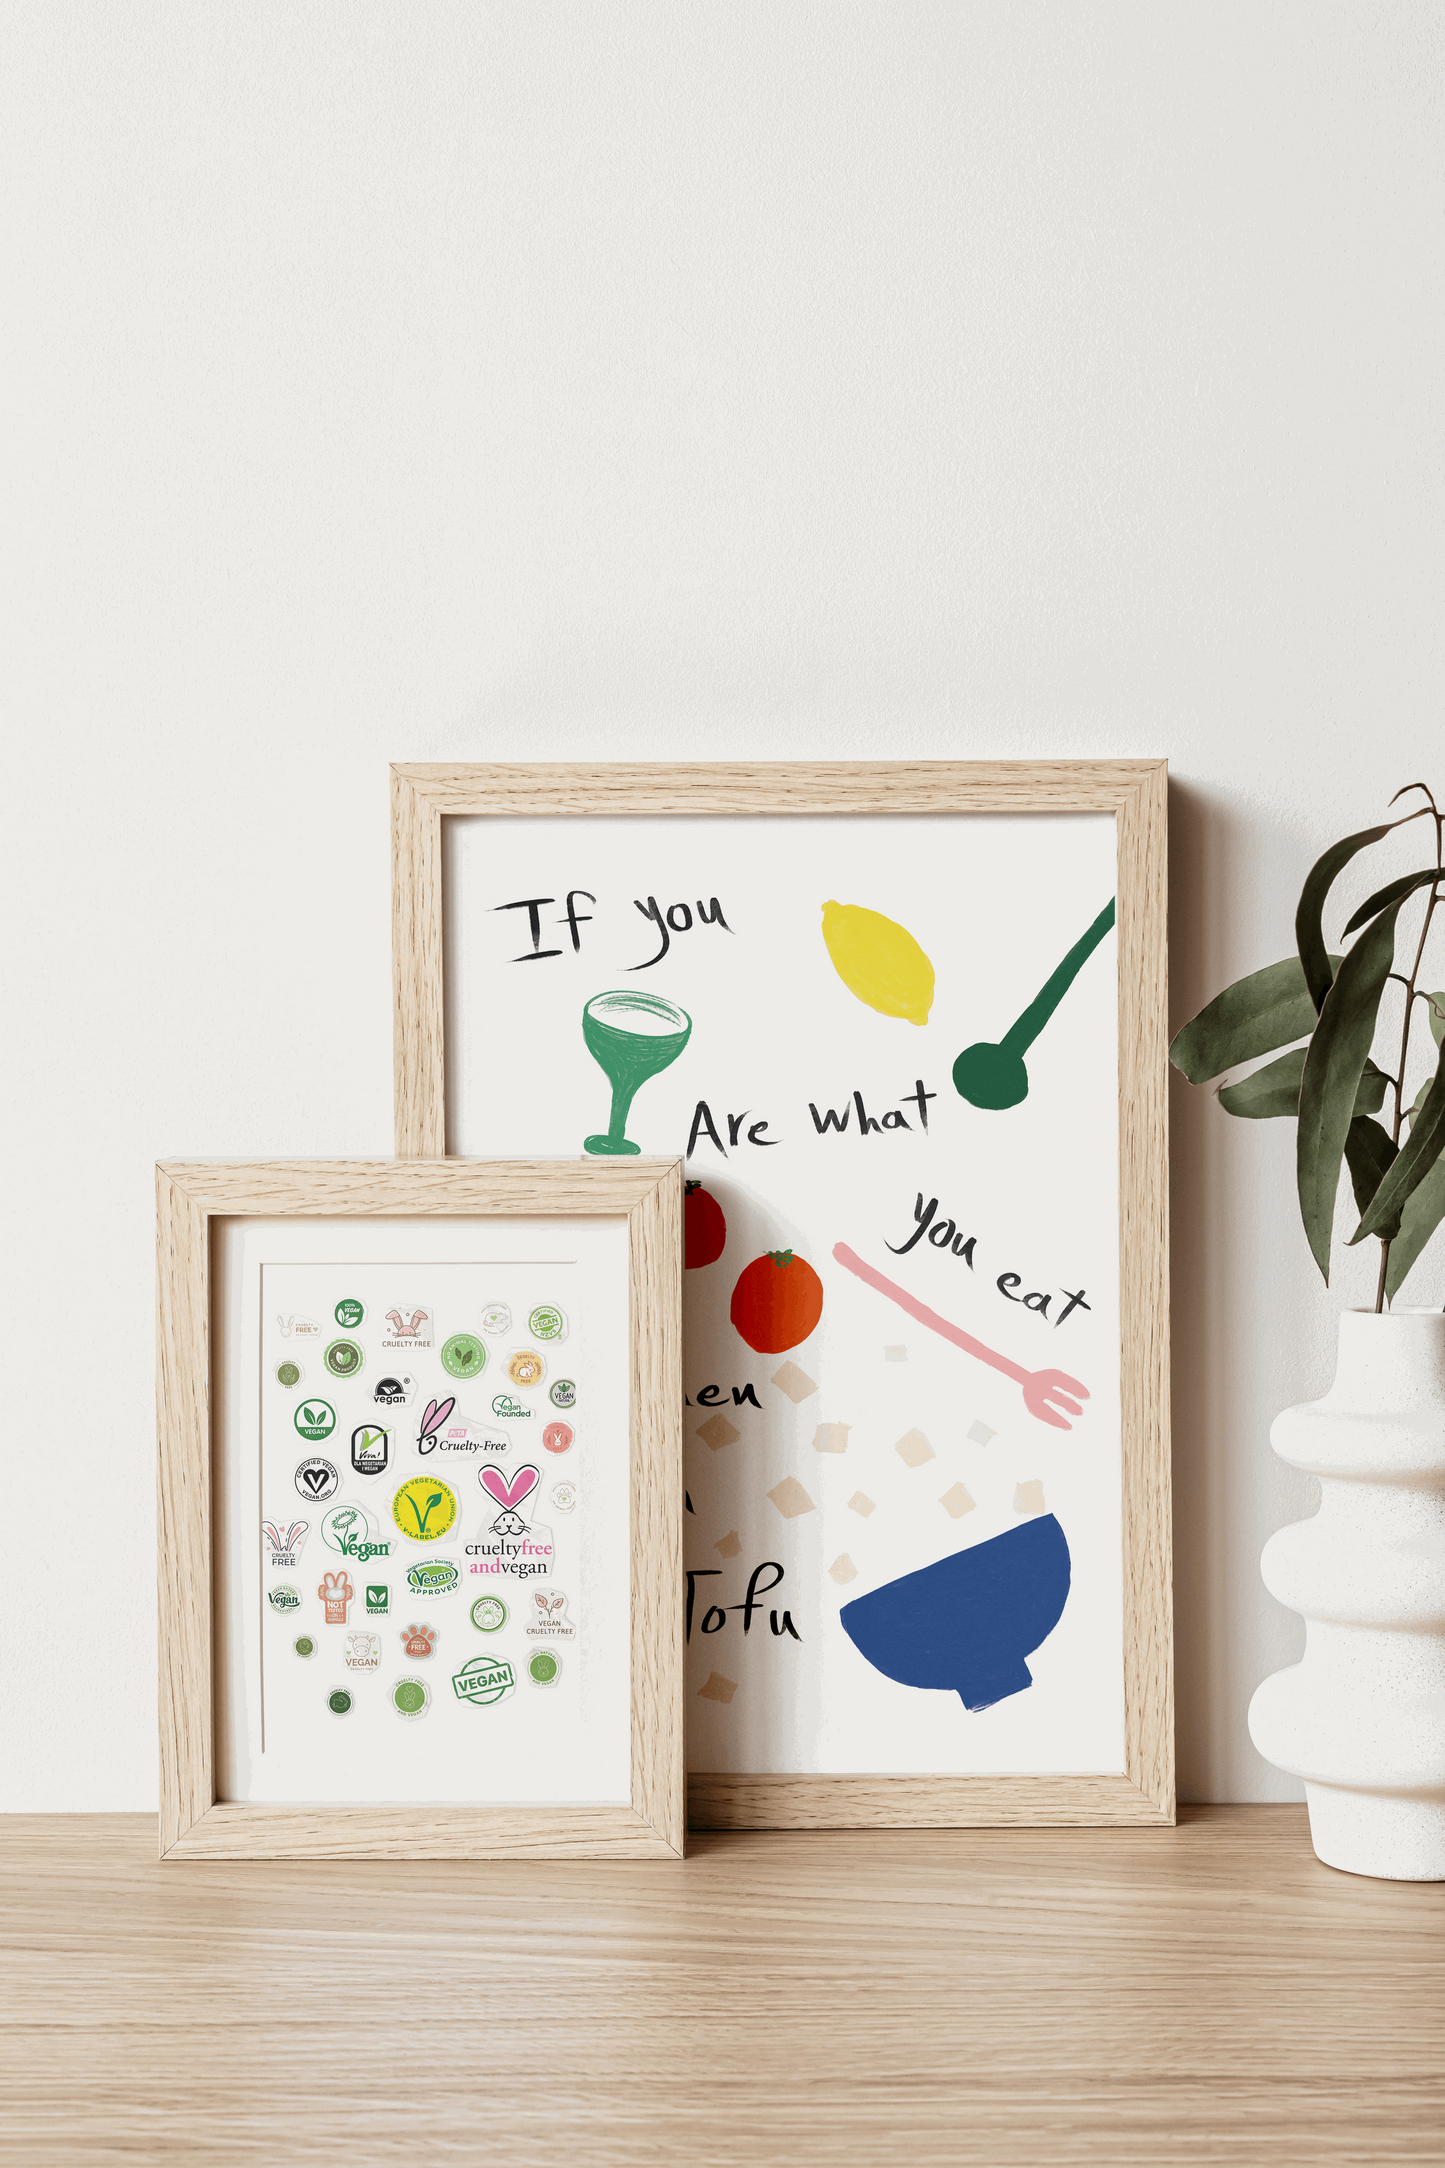 Charming home decor scene with two frames: a larger one with a food and tofu quote, and a smaller one featuring vegan badges, on a wooden table.